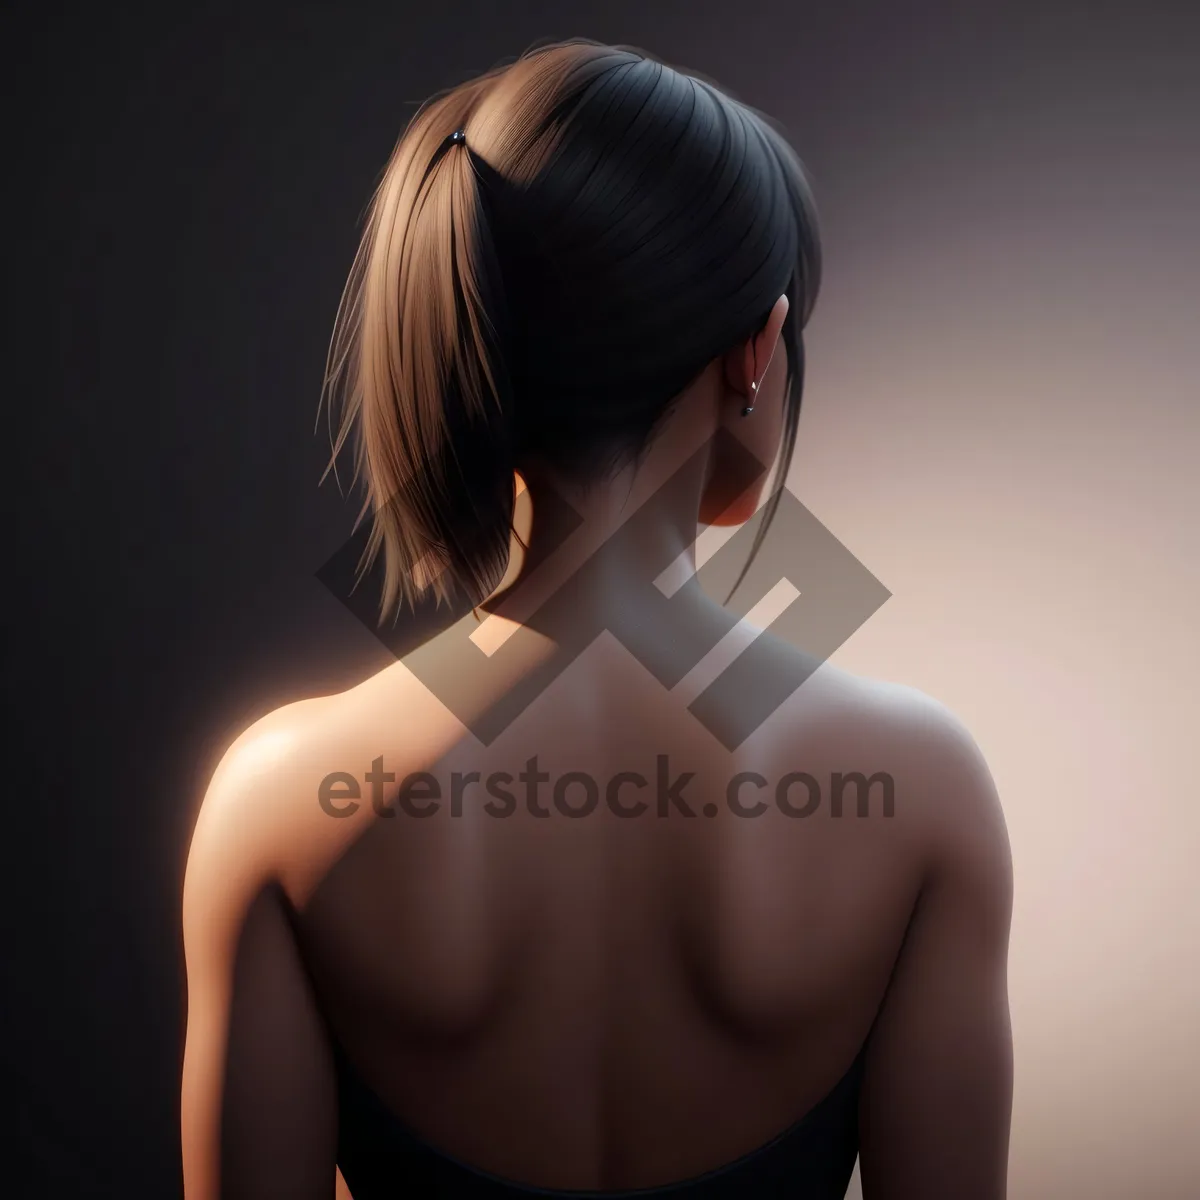 Picture of Sensual Nude Lady Posing in Black